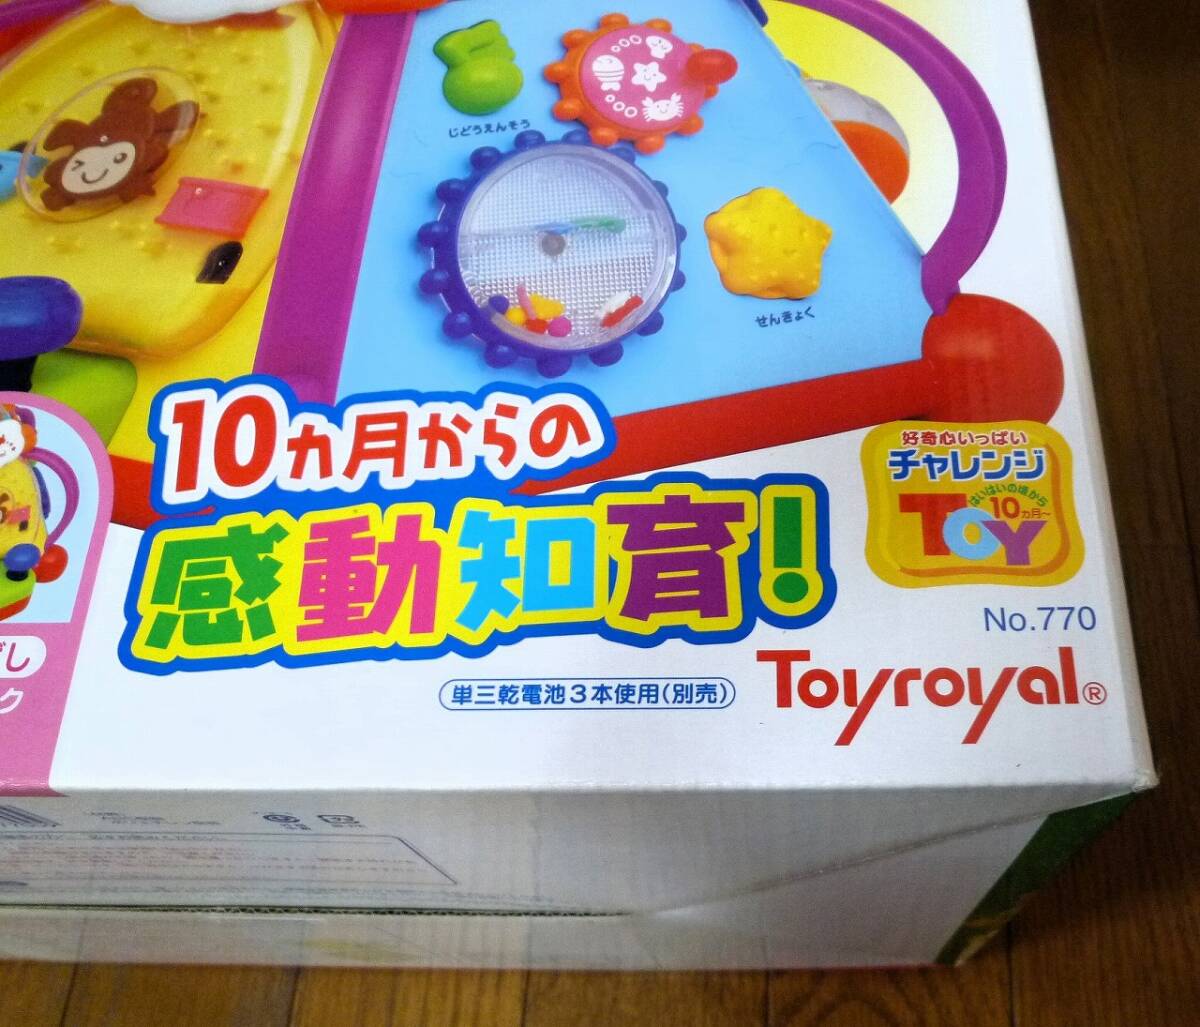 *.. attaching box toy royal 10ka month from. impression intellectual training 18 kind impression action unused goods *